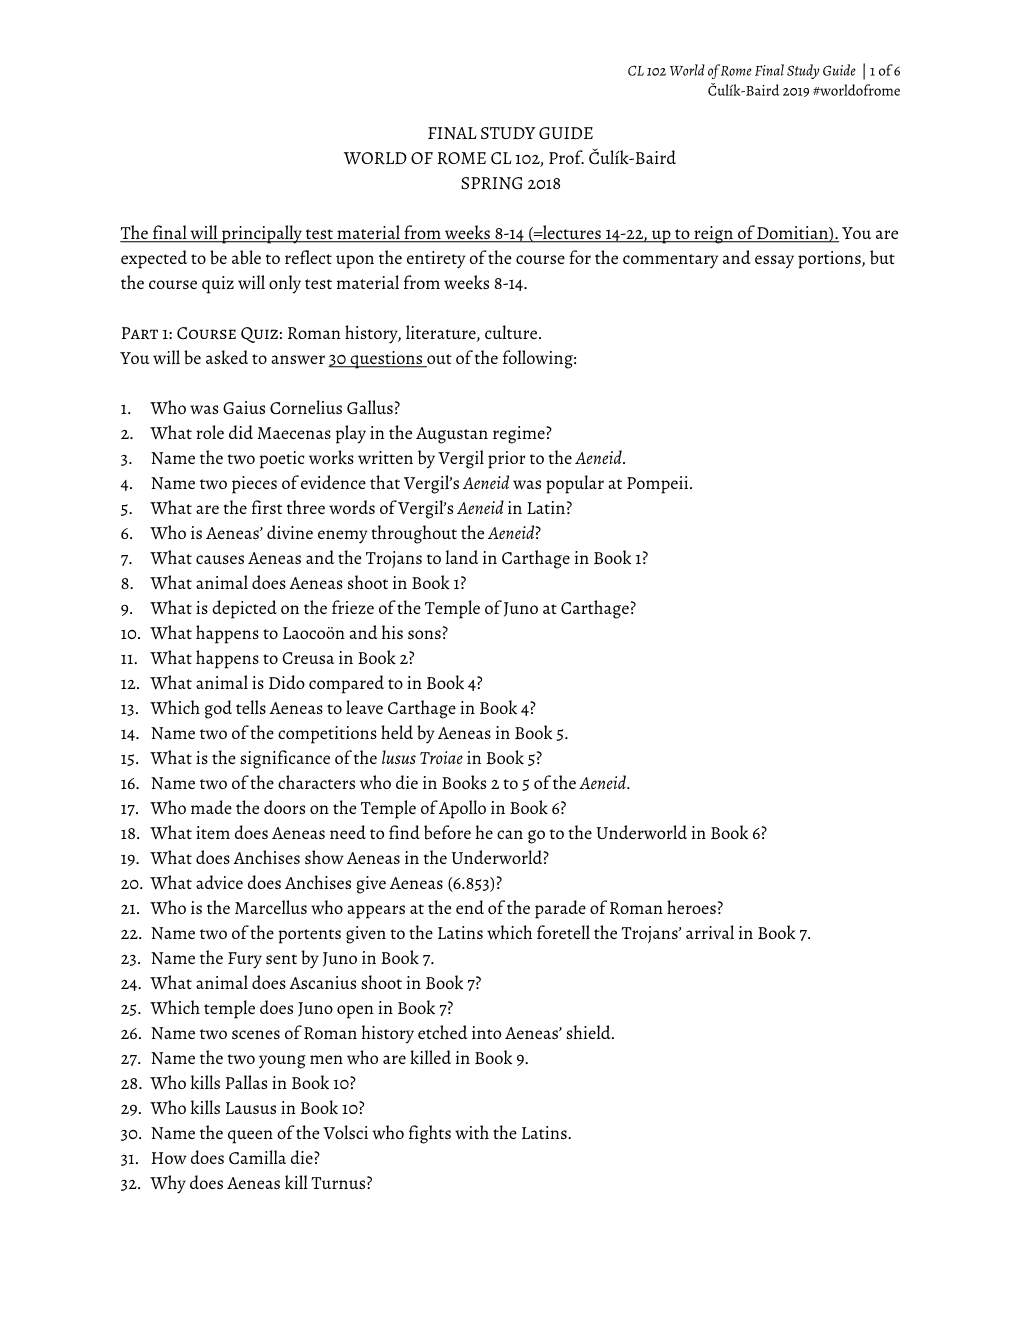 FINAL STUDY GUIDE Cl102 Worldofrome Fall 2019